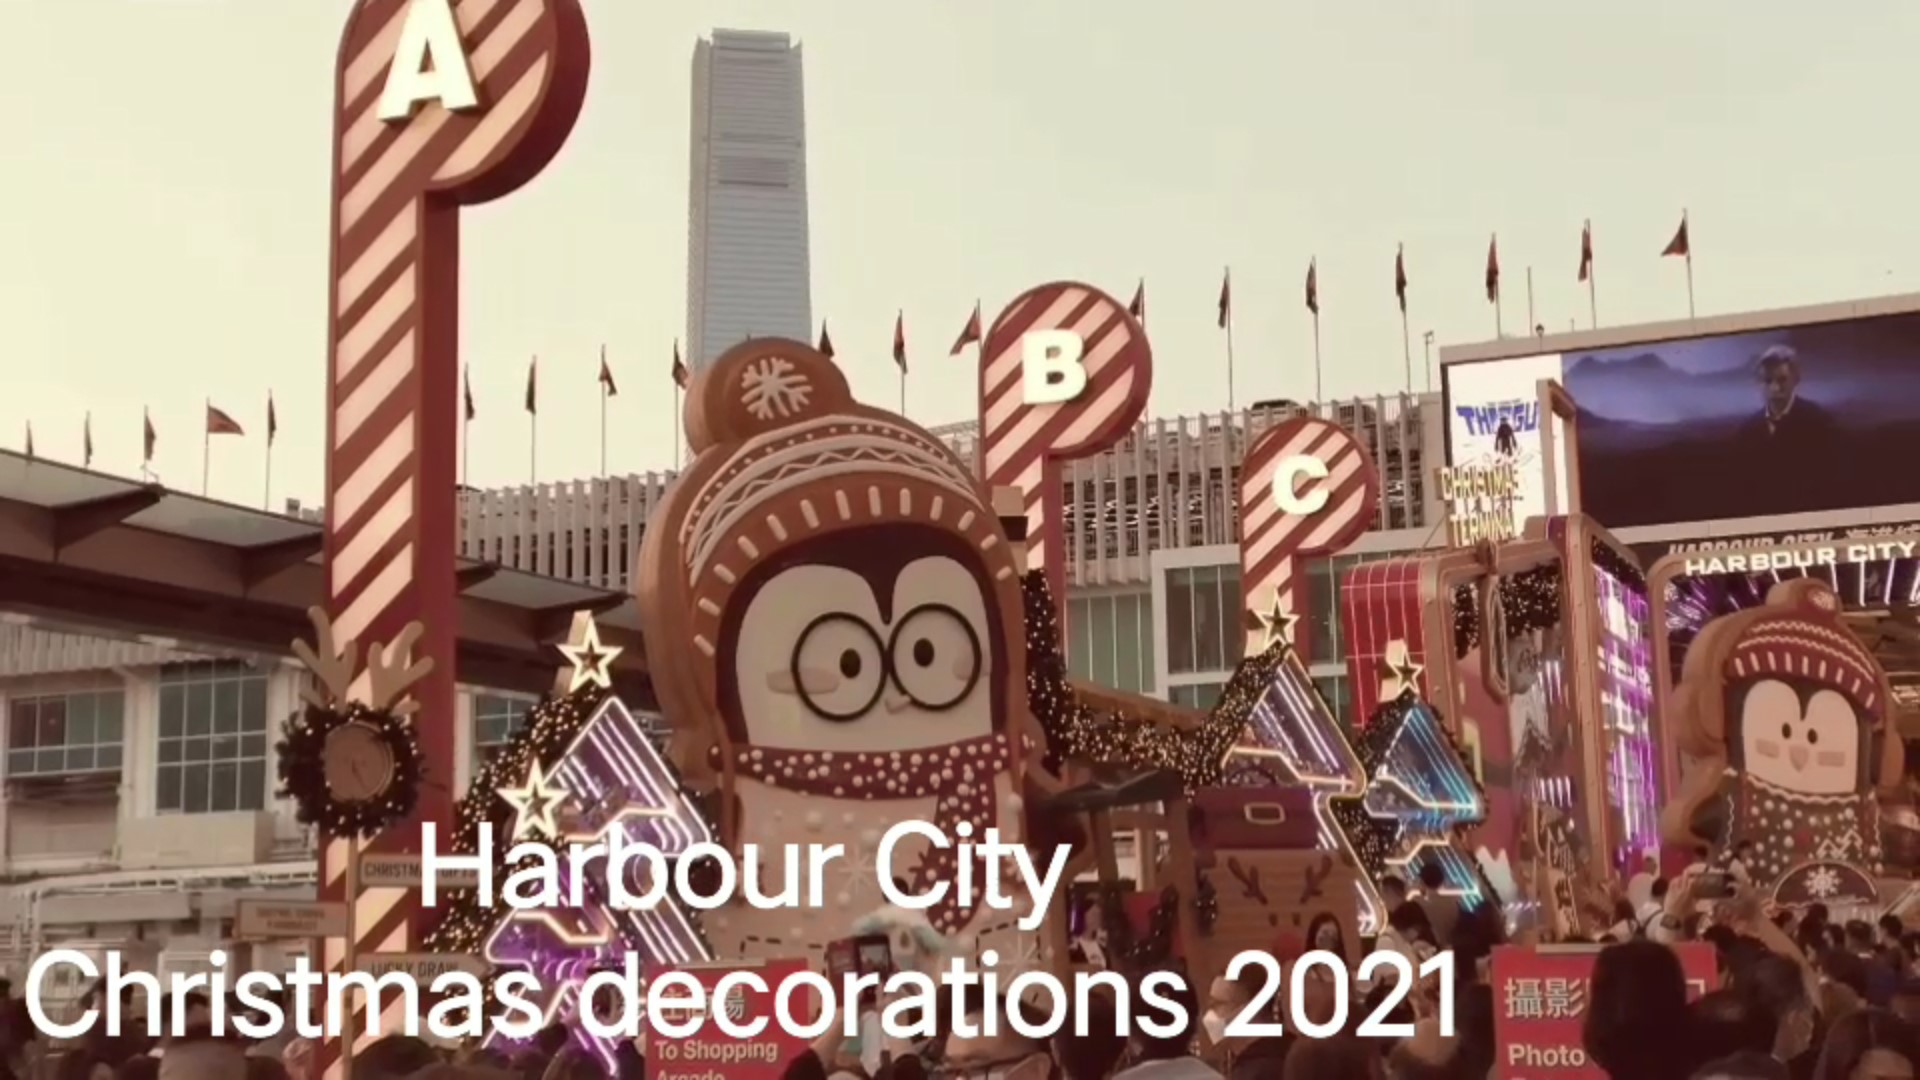 “Harbour City Christmas decorations 2021” snapshots video of Frank